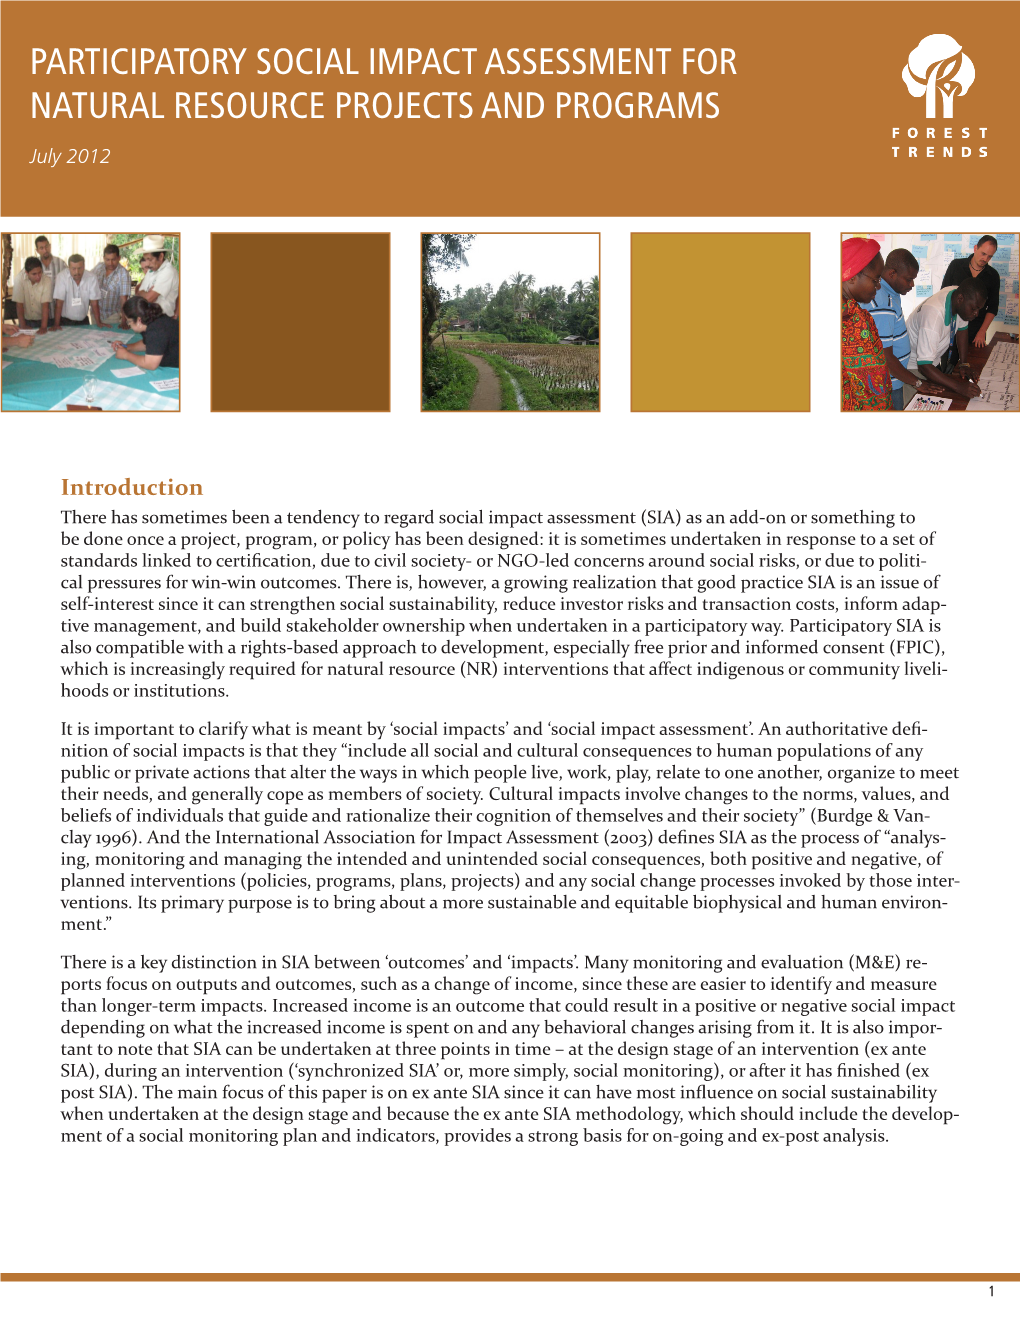 Participatory Social Impact Assessment for Natural Resource Projects and Programs